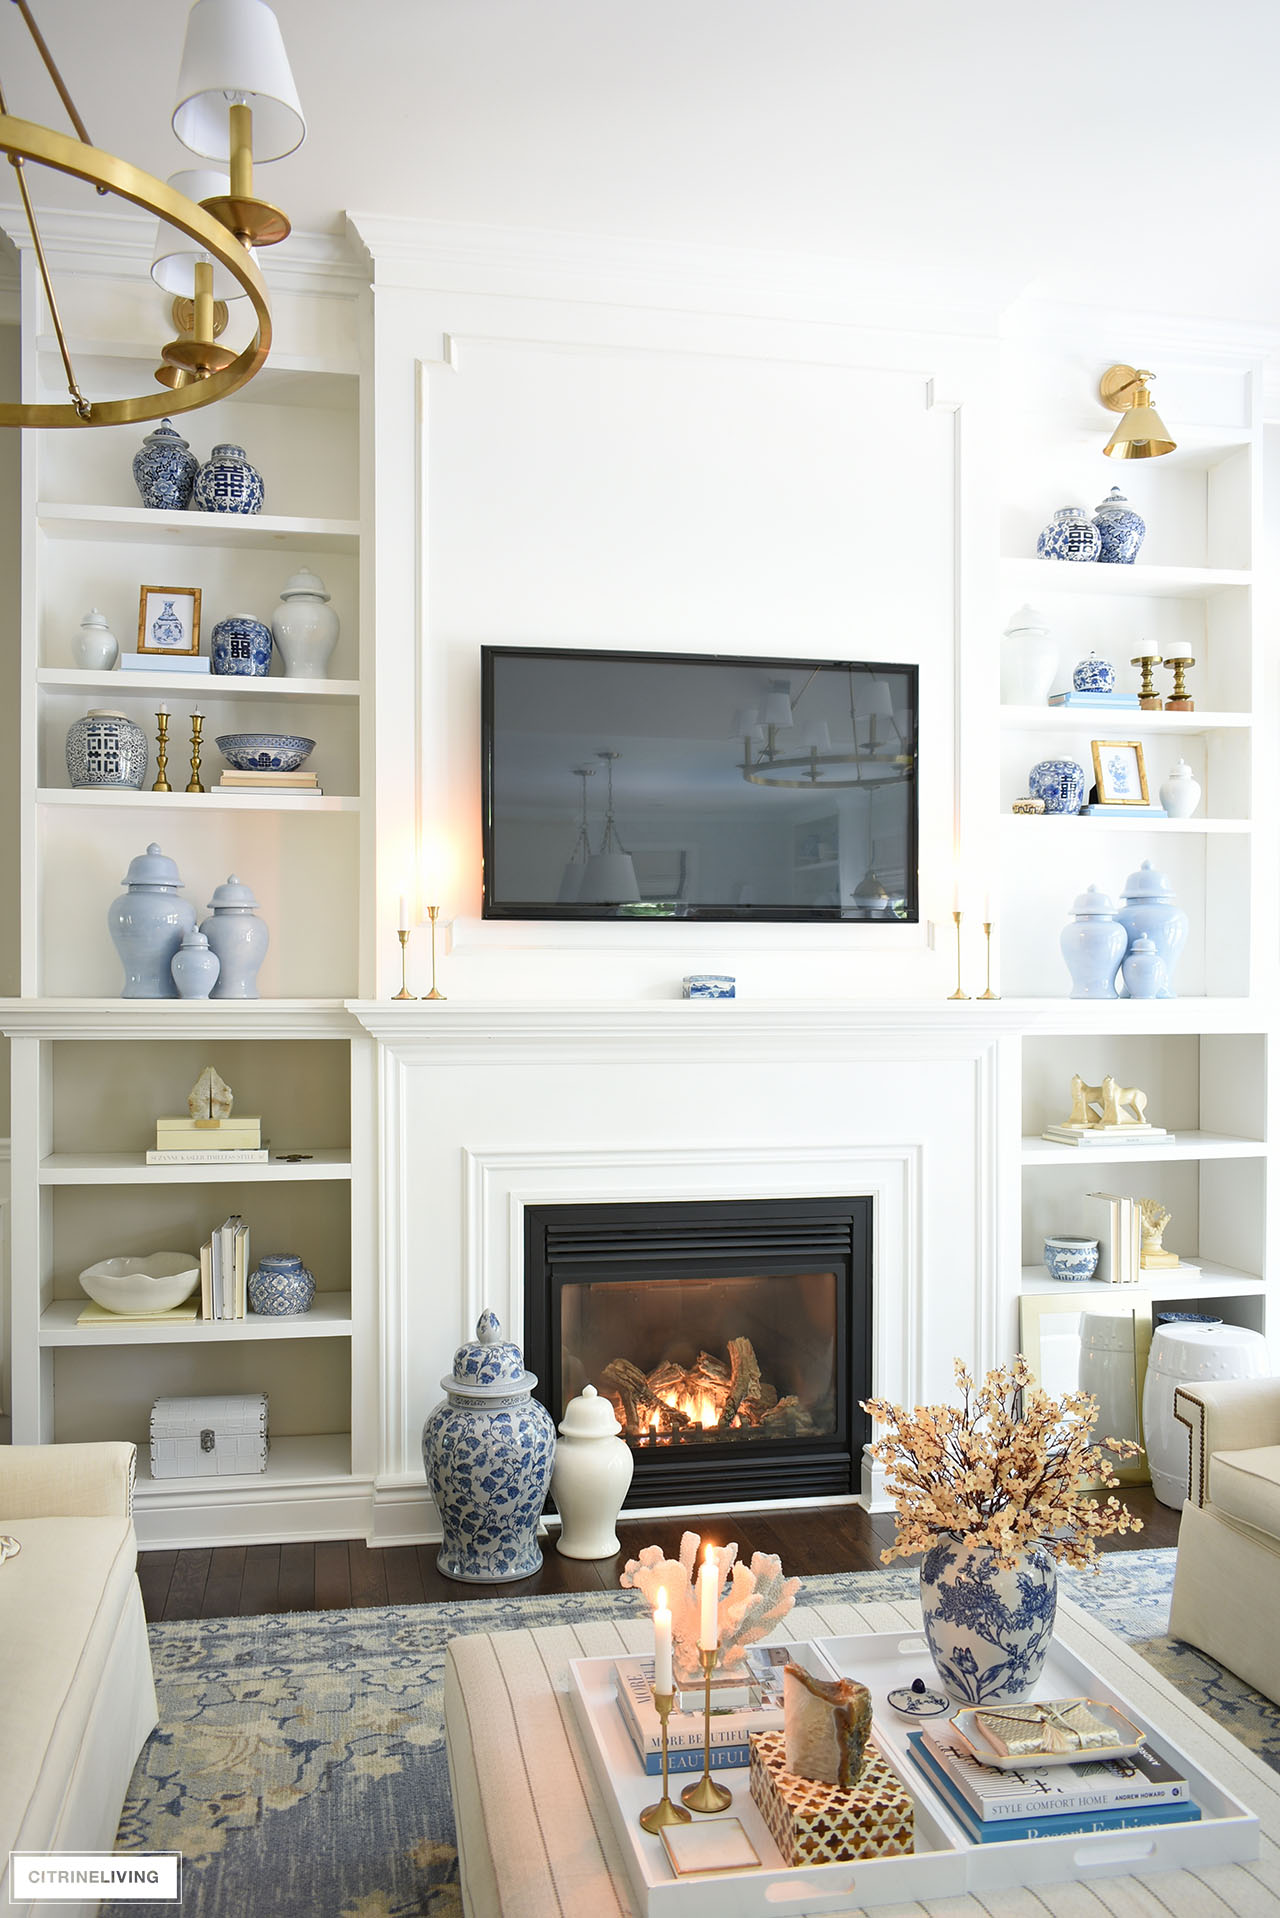 Beautiful tall bookshelves styled for fall in neutrals with touches of navy and white ginger jars, gold candlesticks and frames.